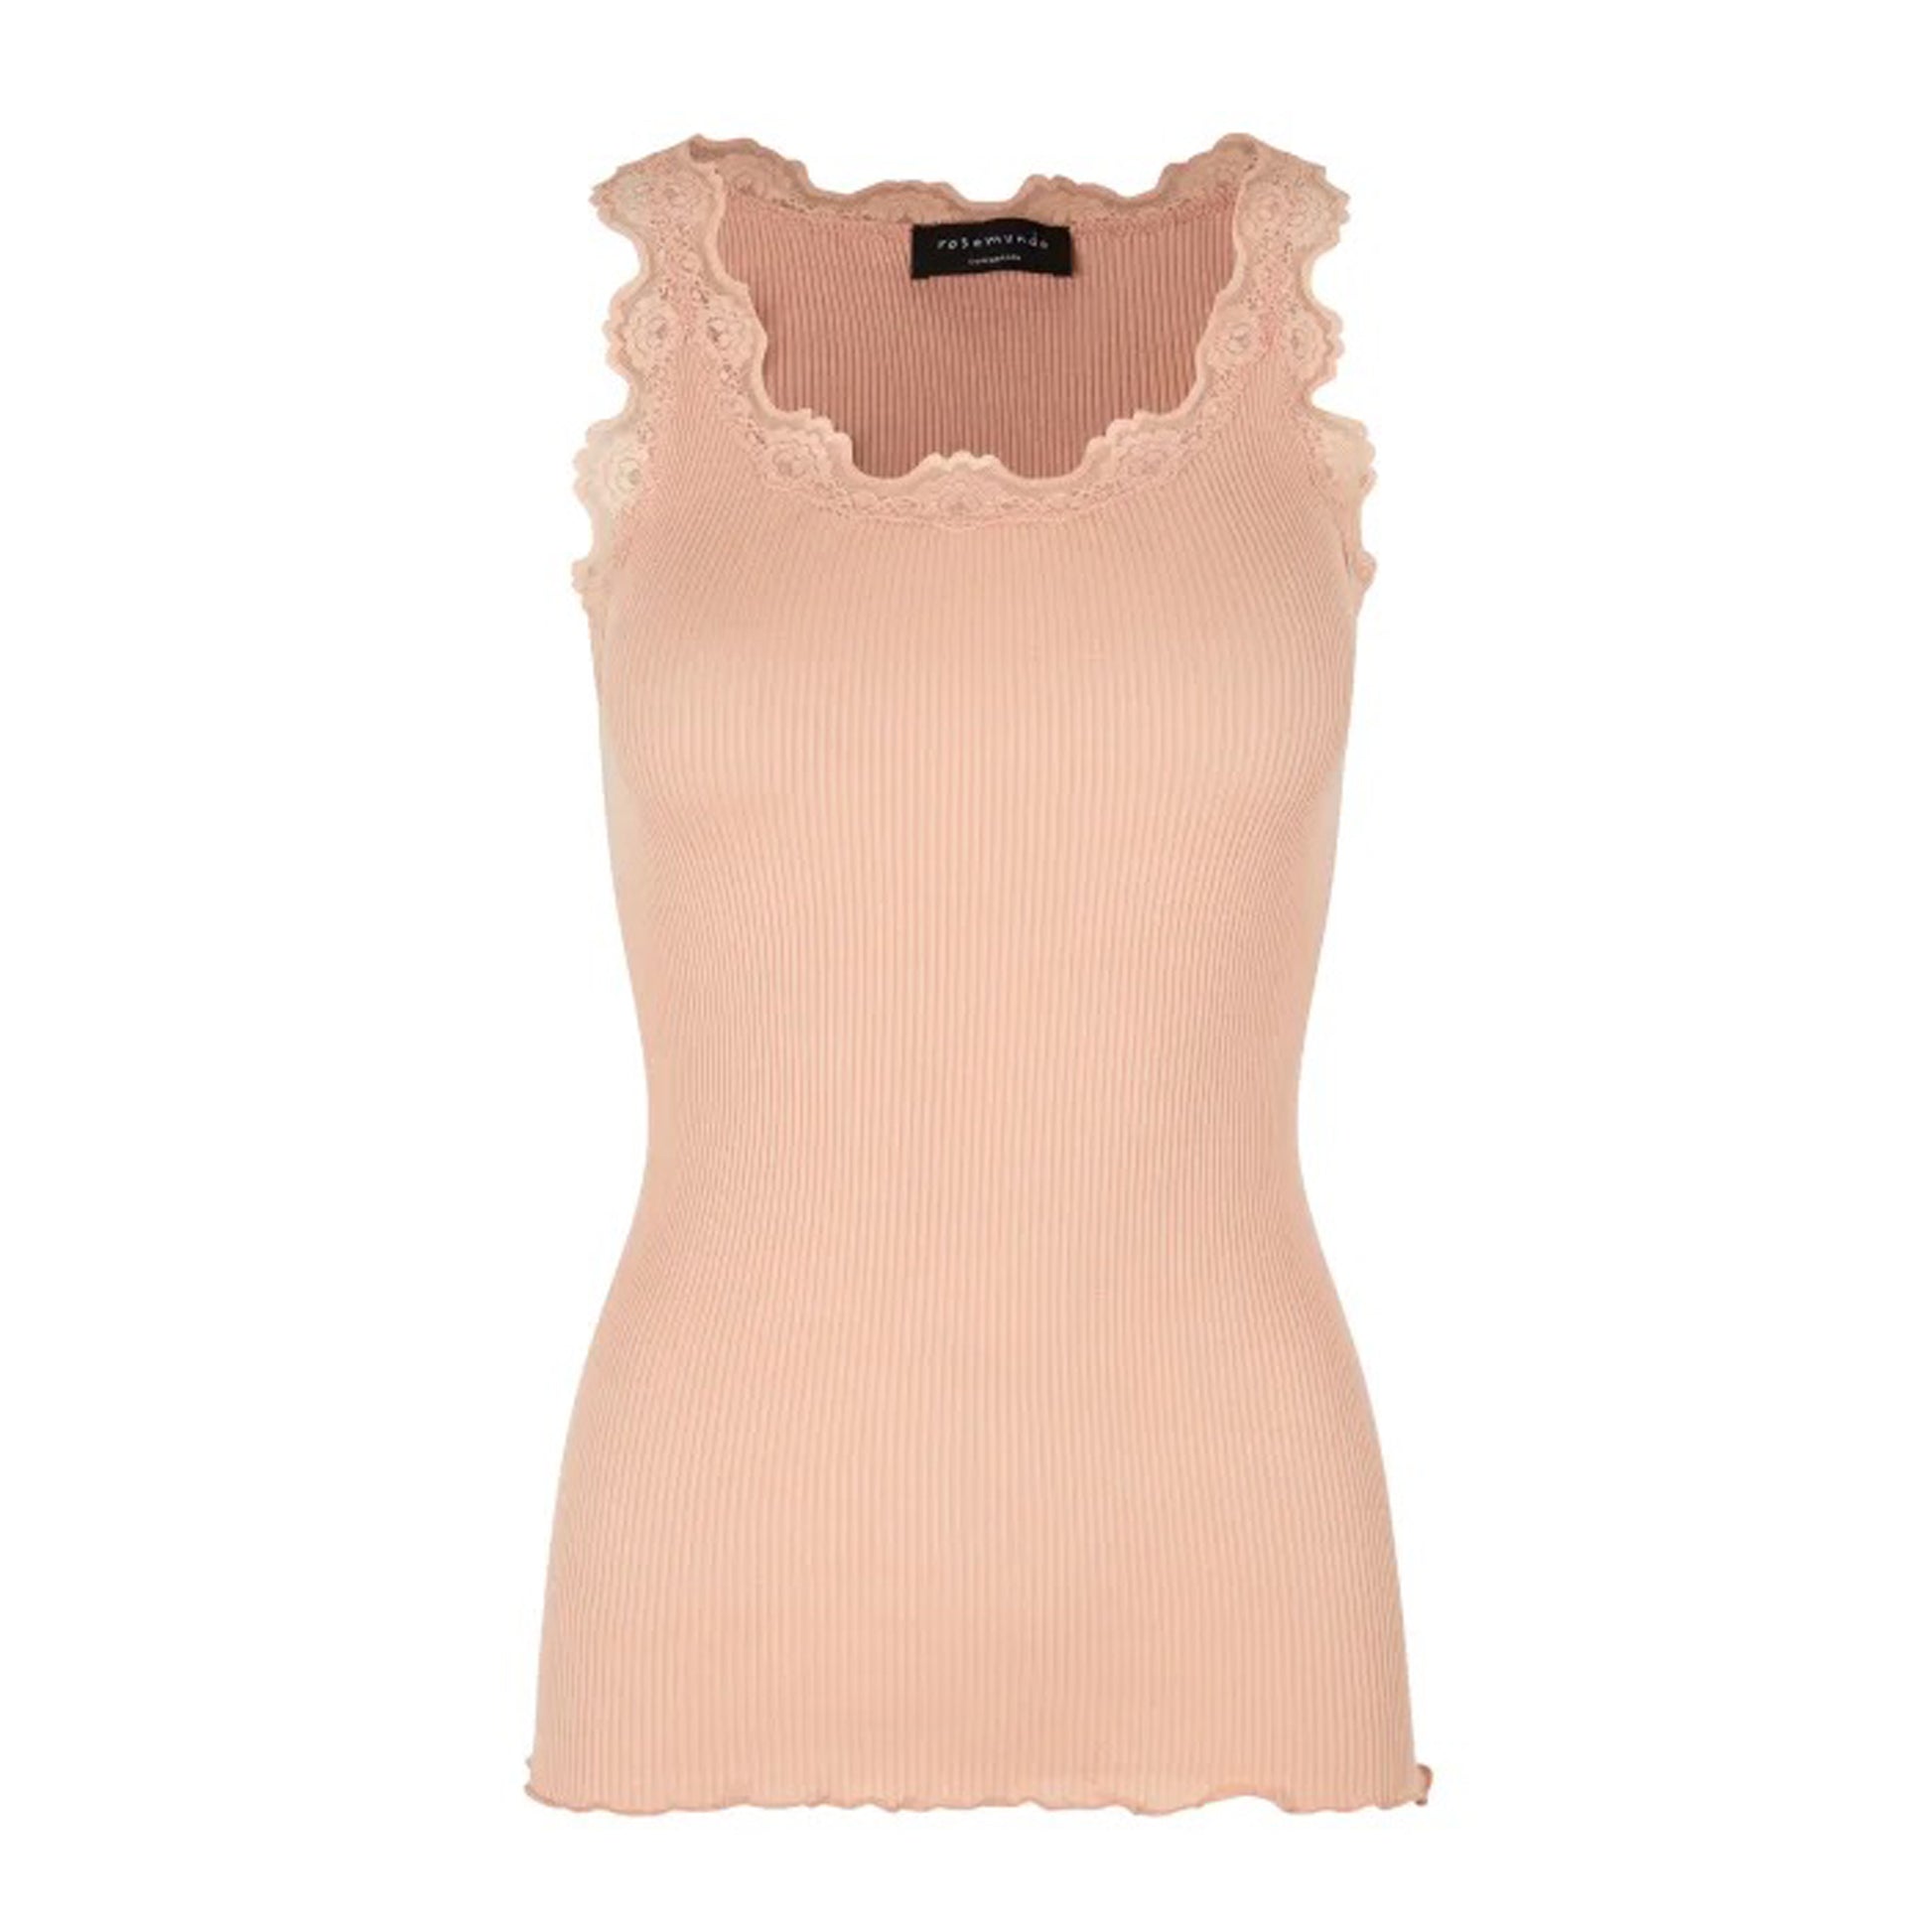 A Rosemunde women's Silk Lace Top with signature lace detailing.